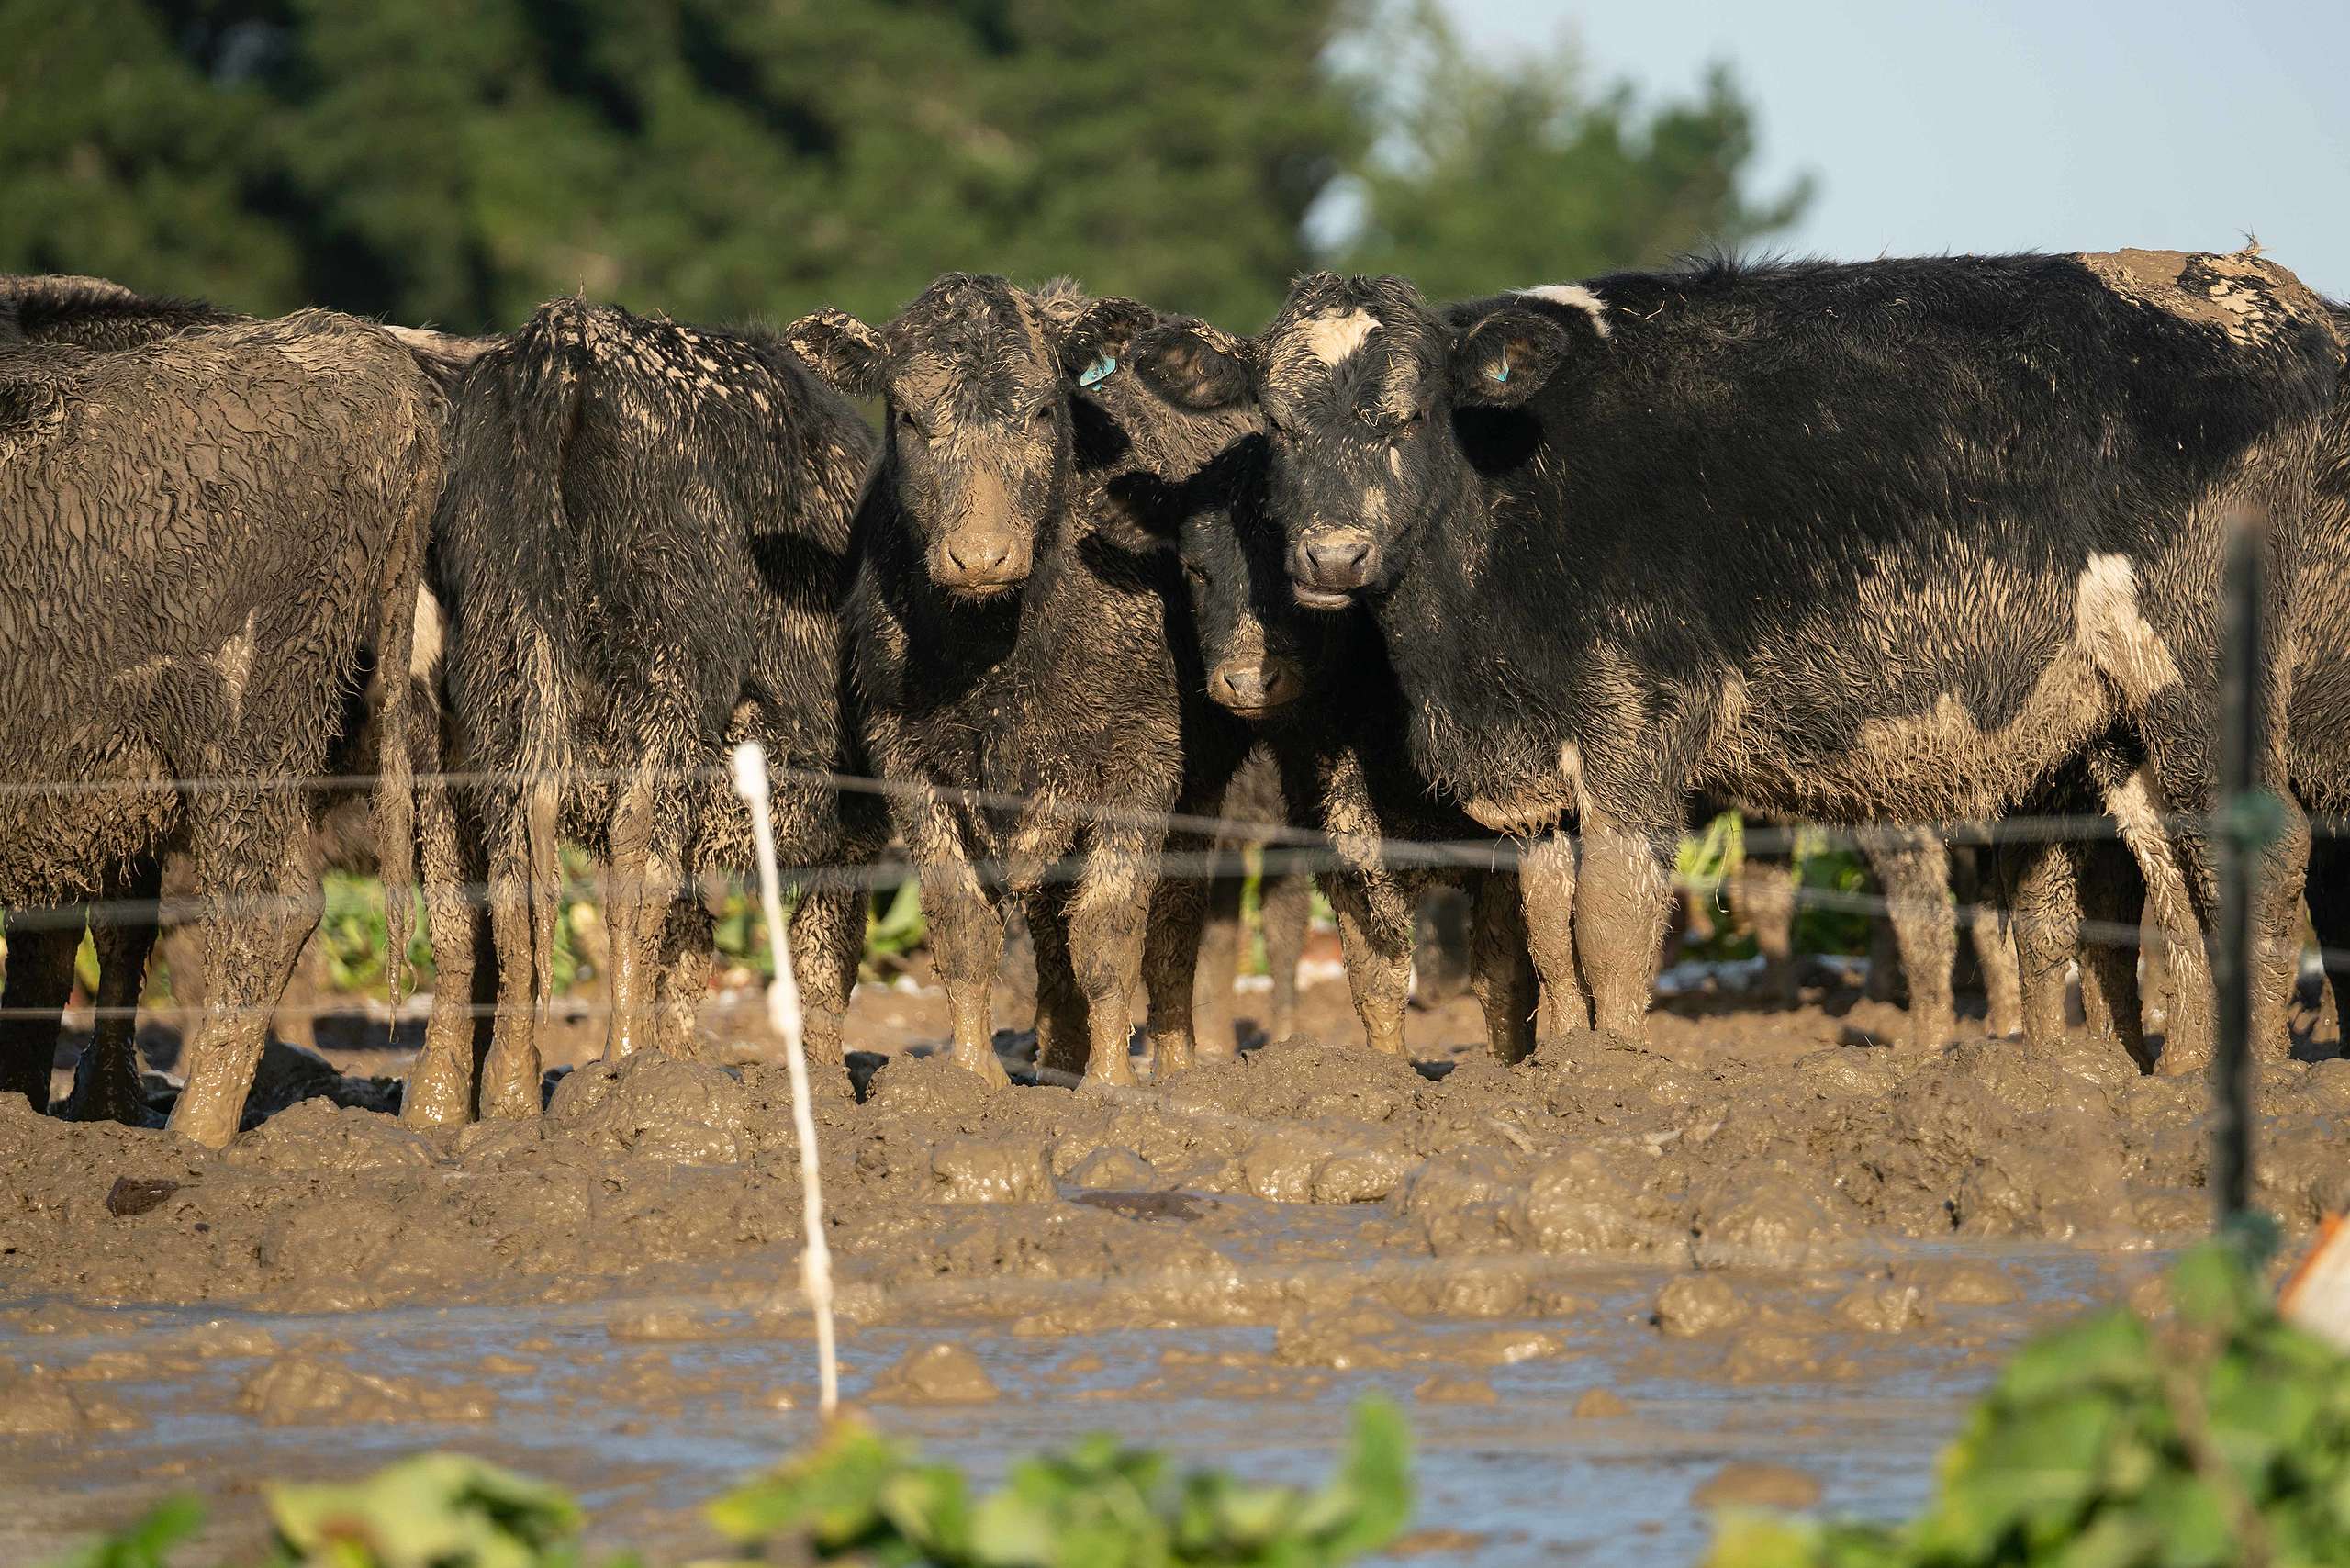 Bunch of cows squished together sitting in mud